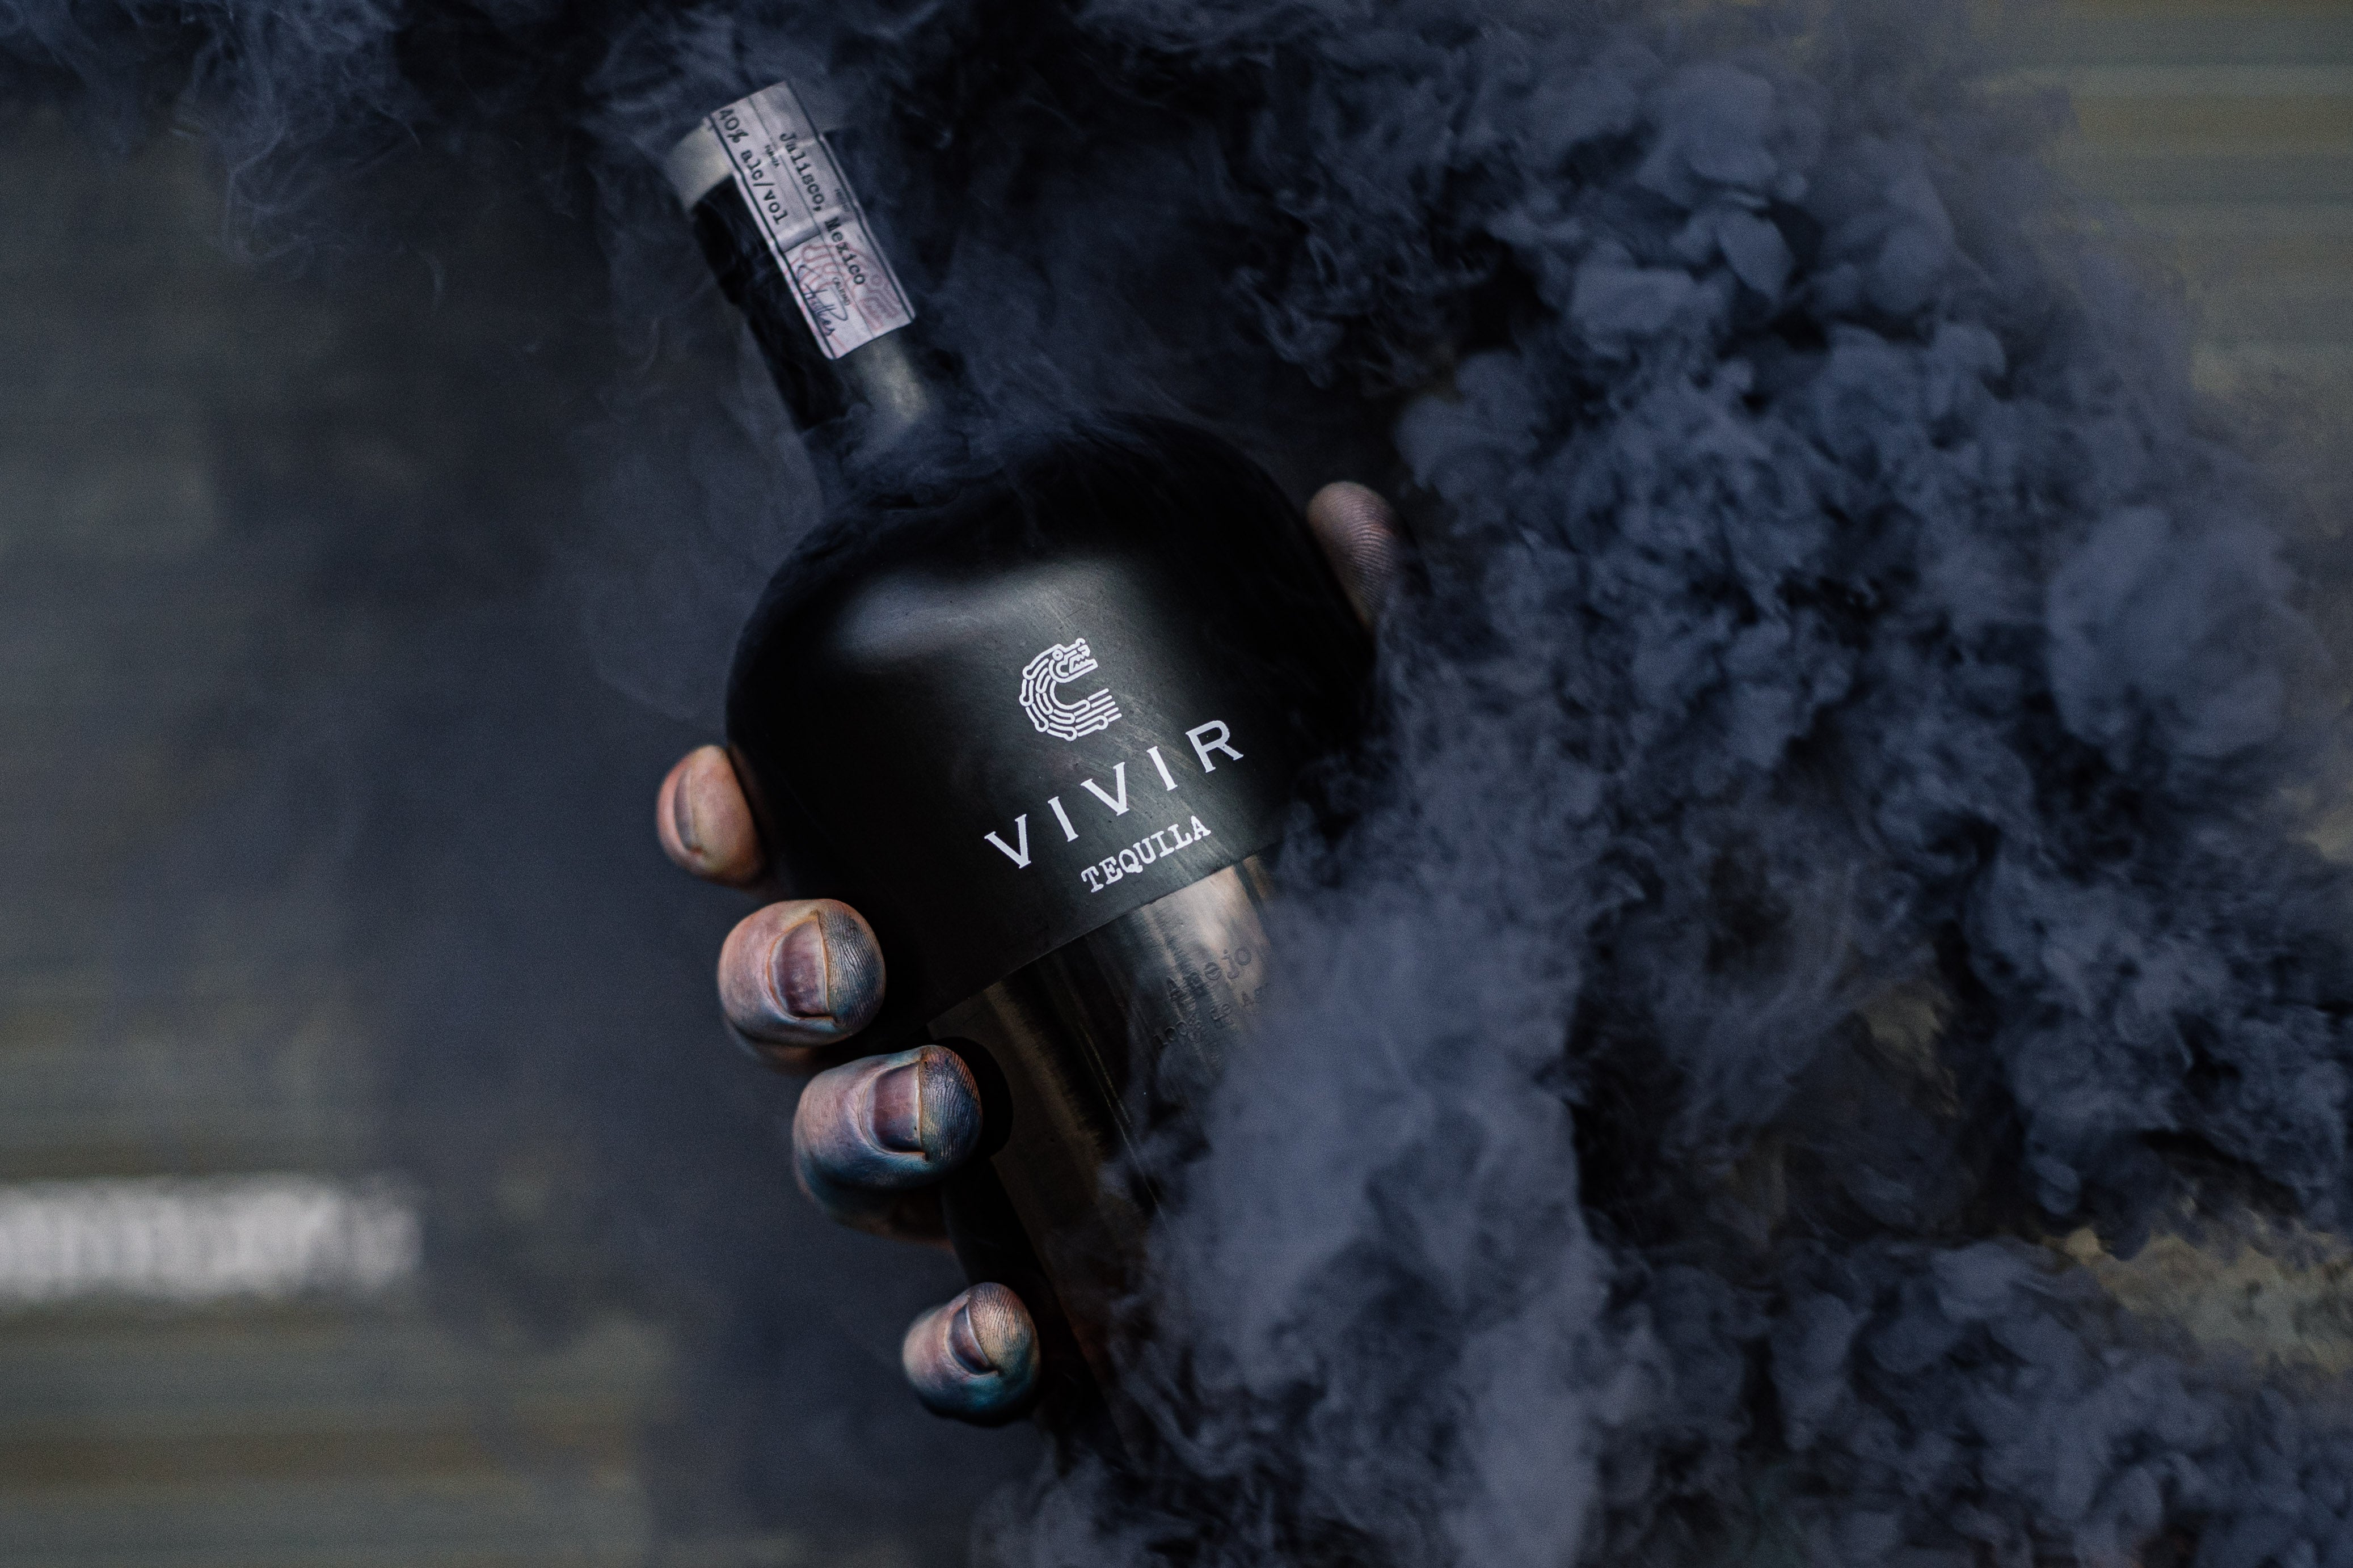 A bottle of VIVIR Tequila Añejo in hand and appearing through navy black smoke.